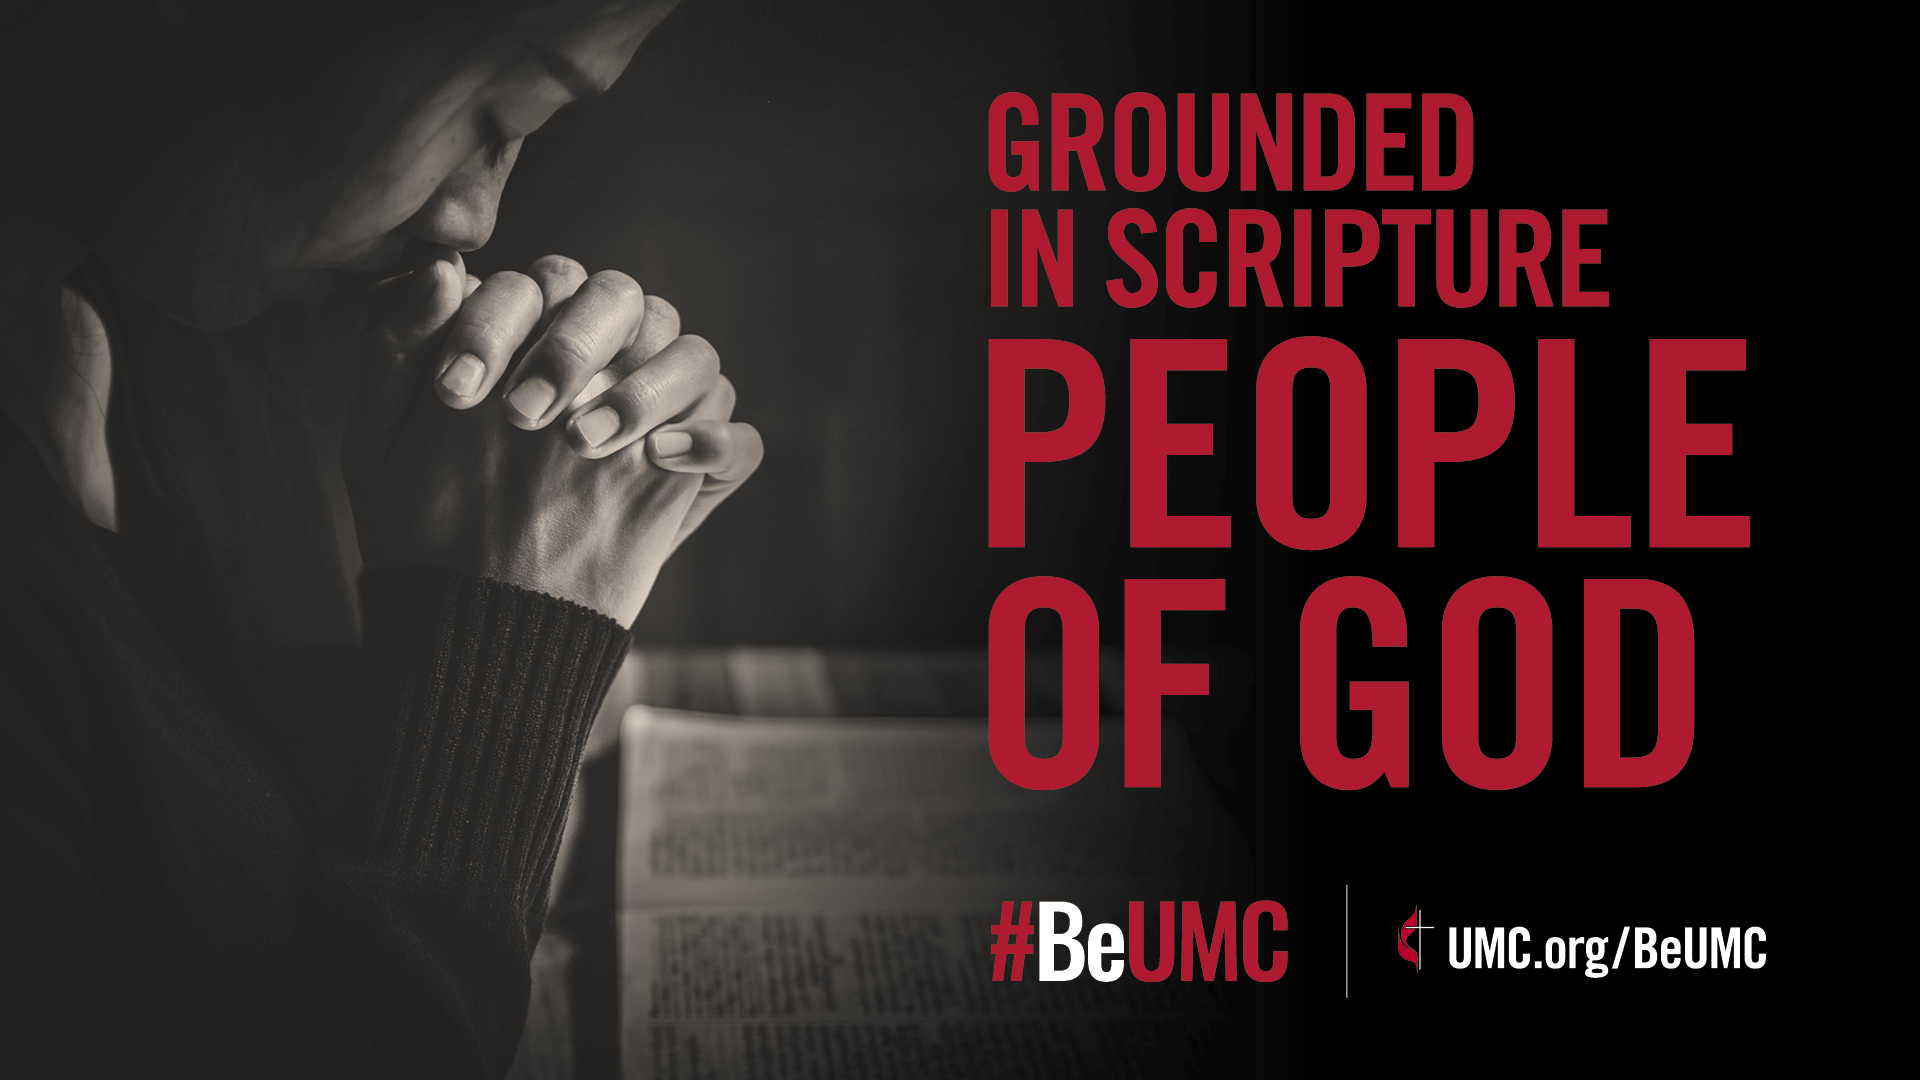 The #BeUMC campaign reminds us of who we are at our best. As people of God called The United Methodist Church, we’re faithful followers of Jesus seeking to make the world a better place. Grace-filled (praise), worship graphic.